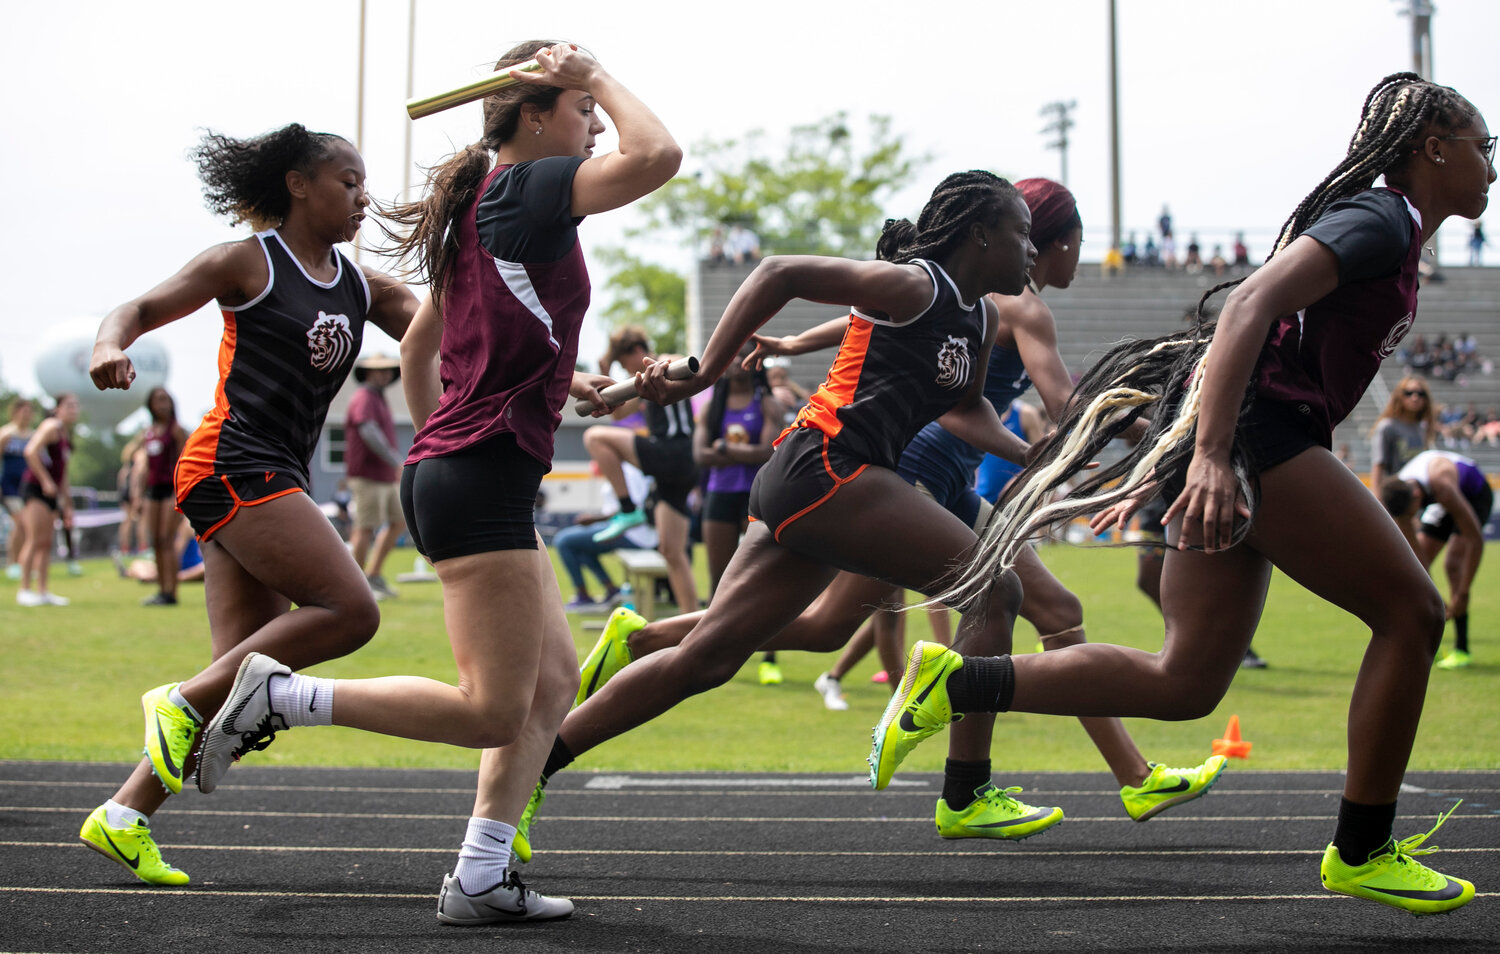 Baldwin County sophomore Alanna Sanders hands off to freshman Talijia Brown while Robertsdale senior Olivia Bundy exchanges with sophomore Angelia Bercant in the first transfer of the 4x100-meter relay race at the Baldwin County Public Schools track and field championship meet in Daphne Tuesday afternoon.